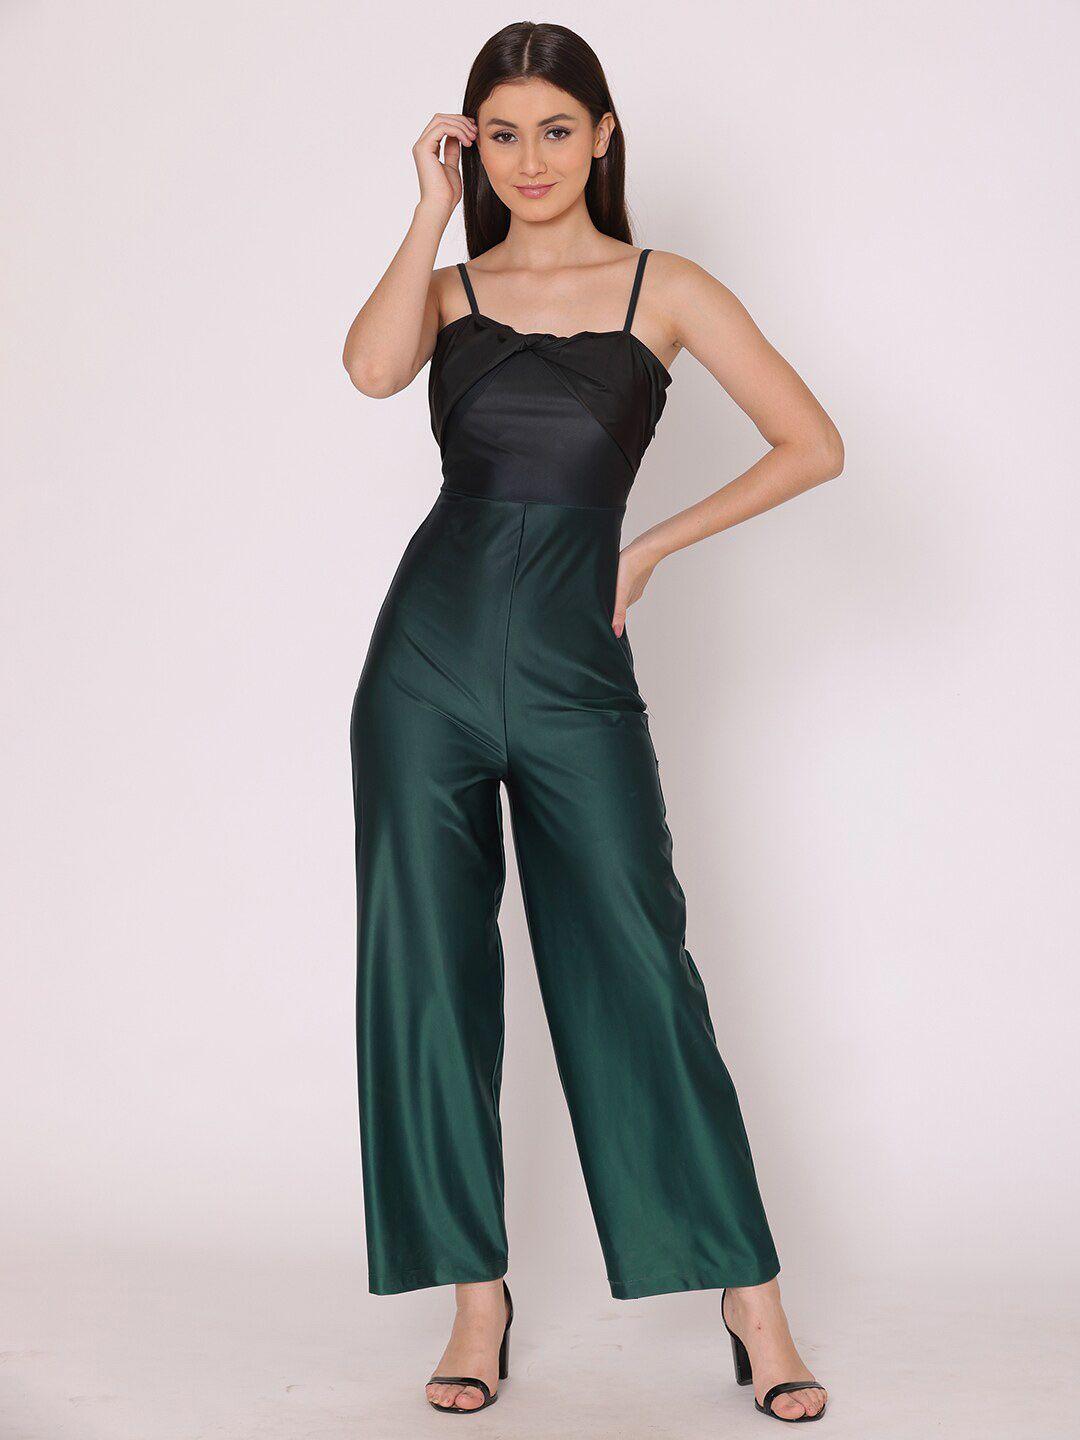 here&now teal solid basic jumpsuit